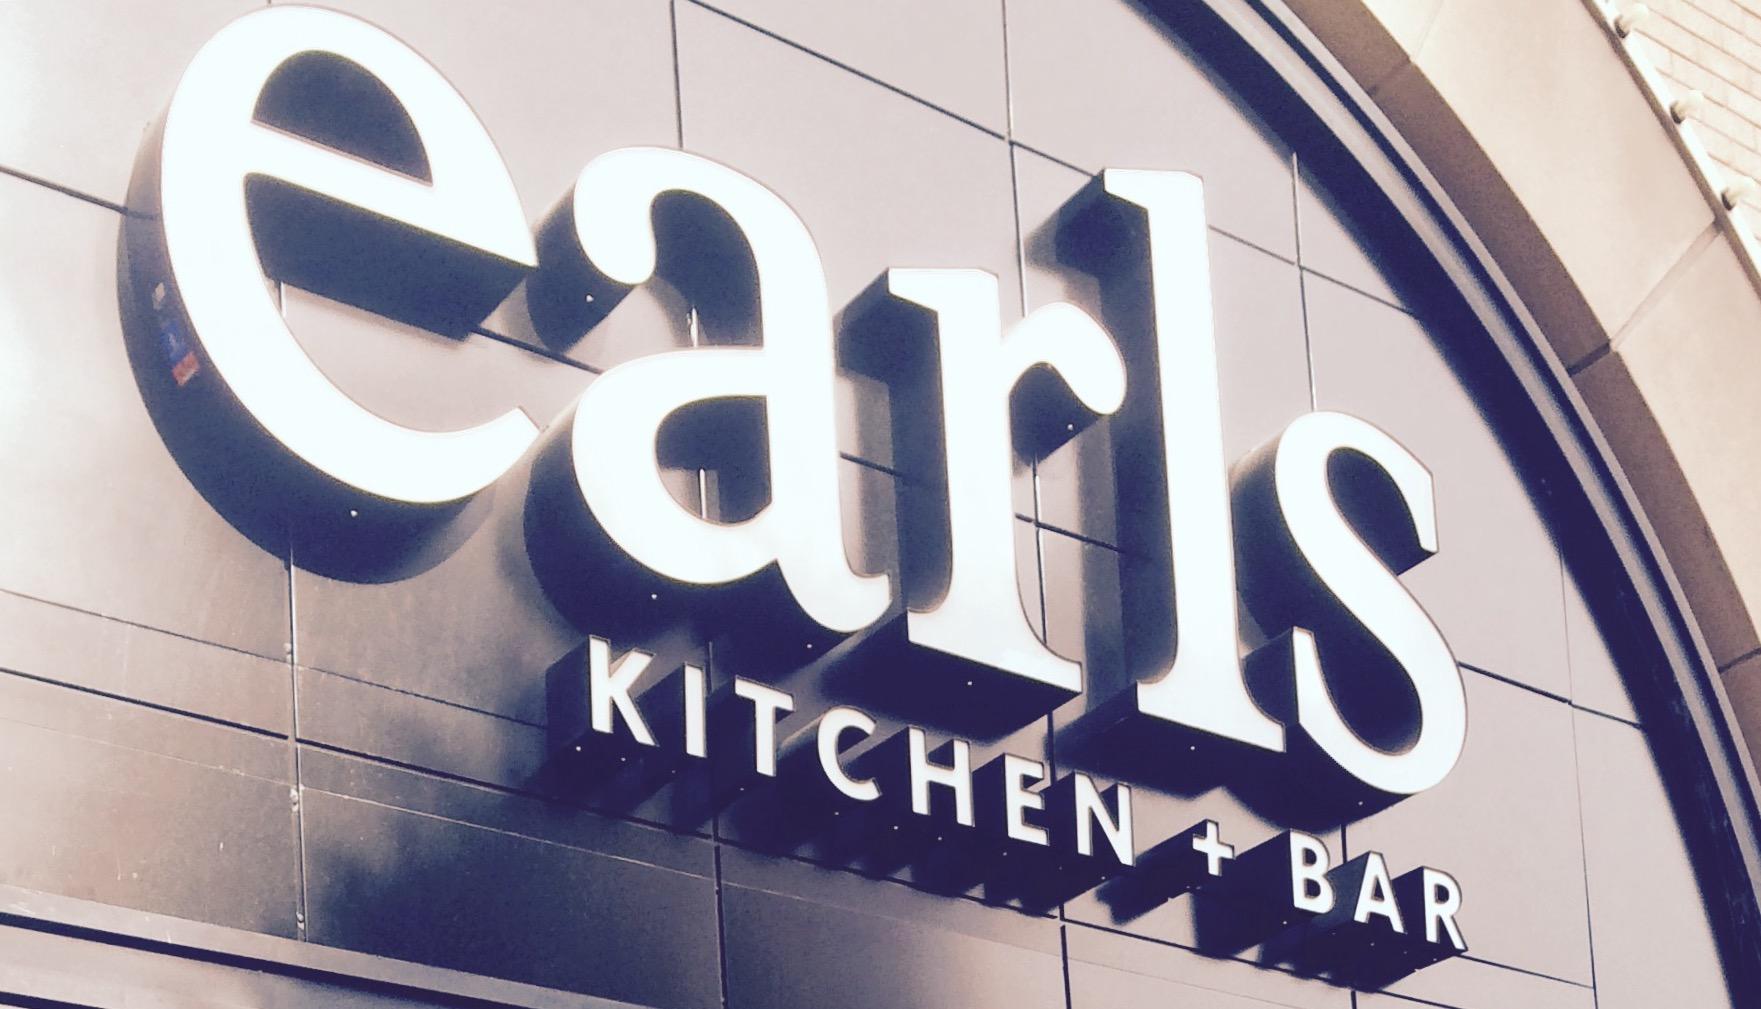 Cover image of this place Earl's Kitchen and Bar